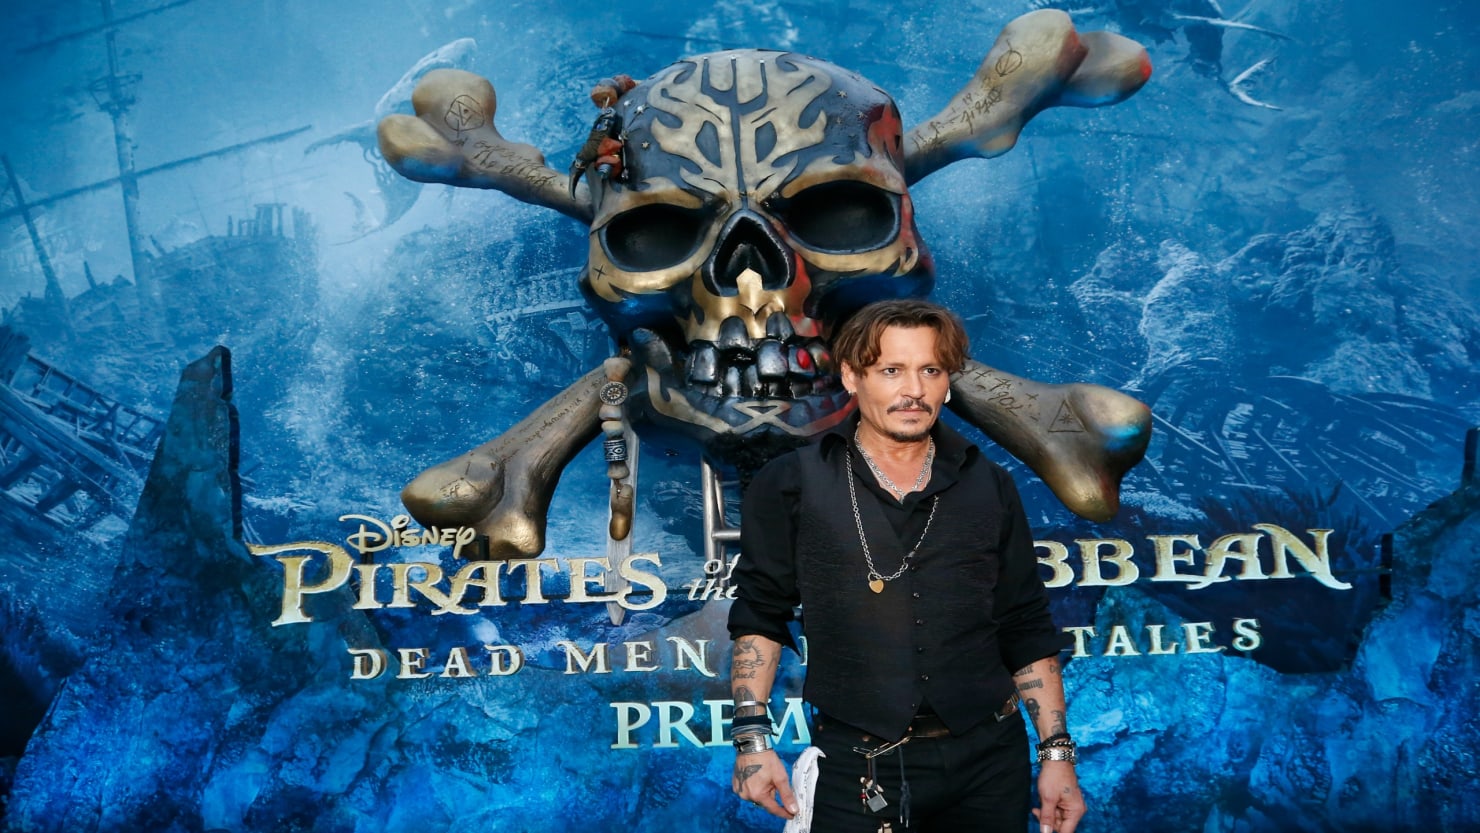 ‘Pirates of the Caribbean’ Wins Holiday Box Office1480 x 833